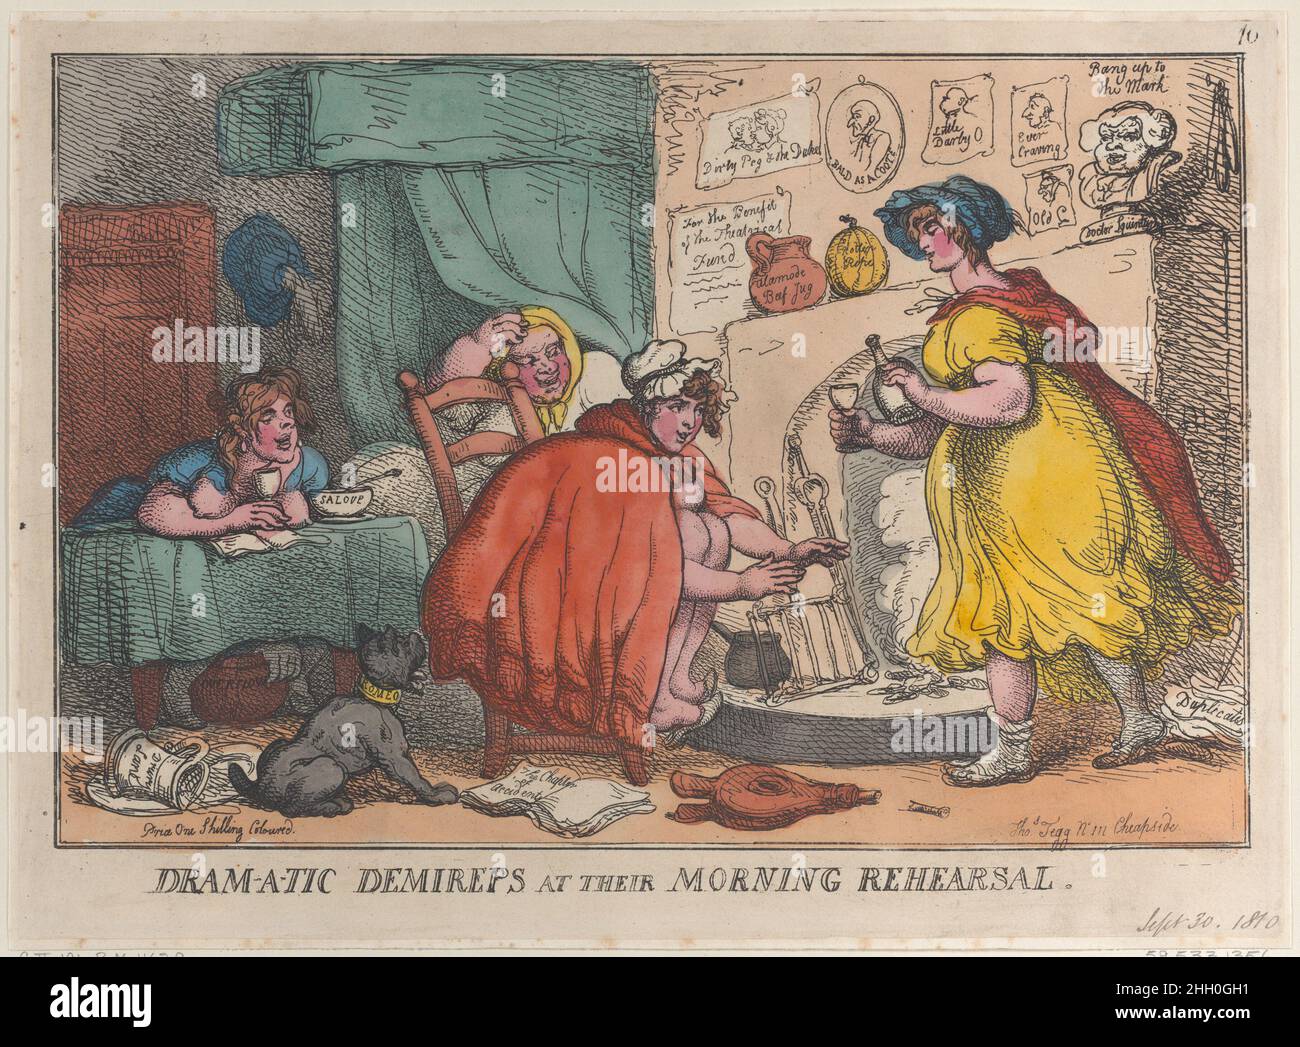 Dram-a-tic Demireps at their Morning Rehearsal September 30, 1810 Thomas Rowlandson Four women, still in their bedclothes, drinking in a messy room.. Dram-a-tic Demireps at their Morning Rehearsal. 'Tegg's Caricatures'. Thomas Rowlandson (British, London 1757–1827 London). September 30, 1810. Hand-colored etching. Thomas Tegg (British, 1776–1846). Prints Stock Photo